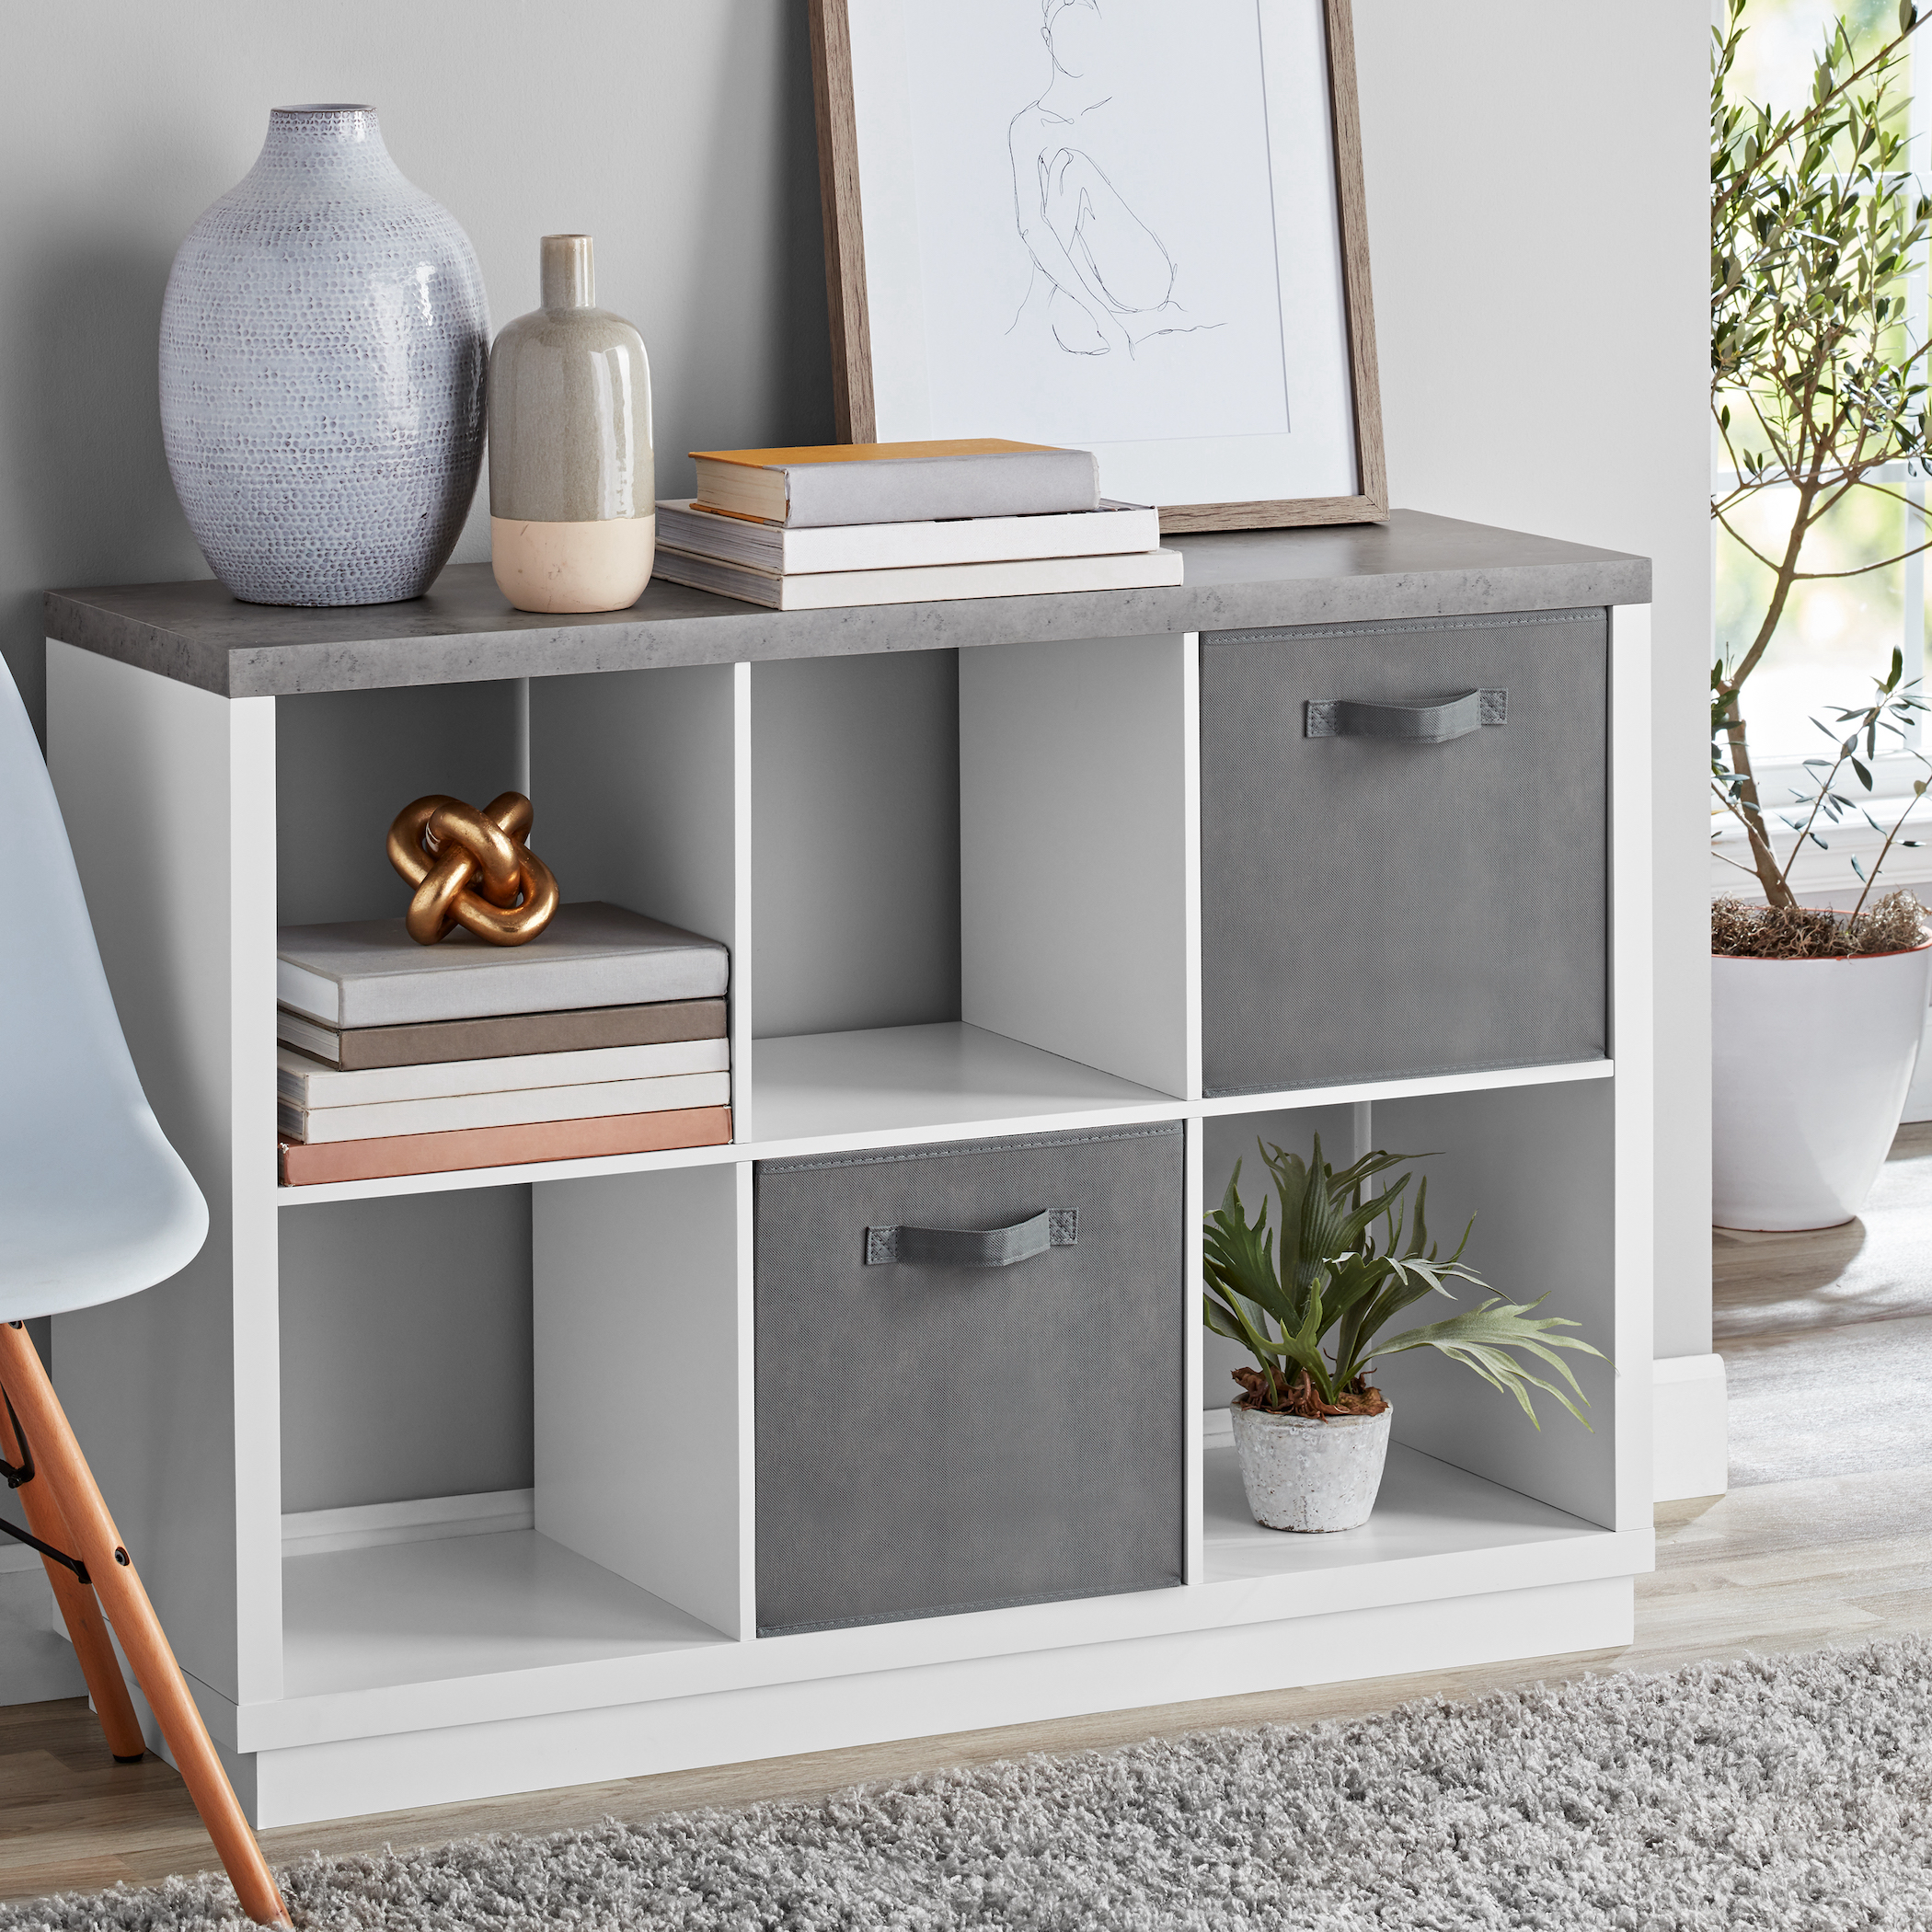 Build Your Own Furniture 6-Cube Organizer, White with Faux Concrete Top - image 1 of 6